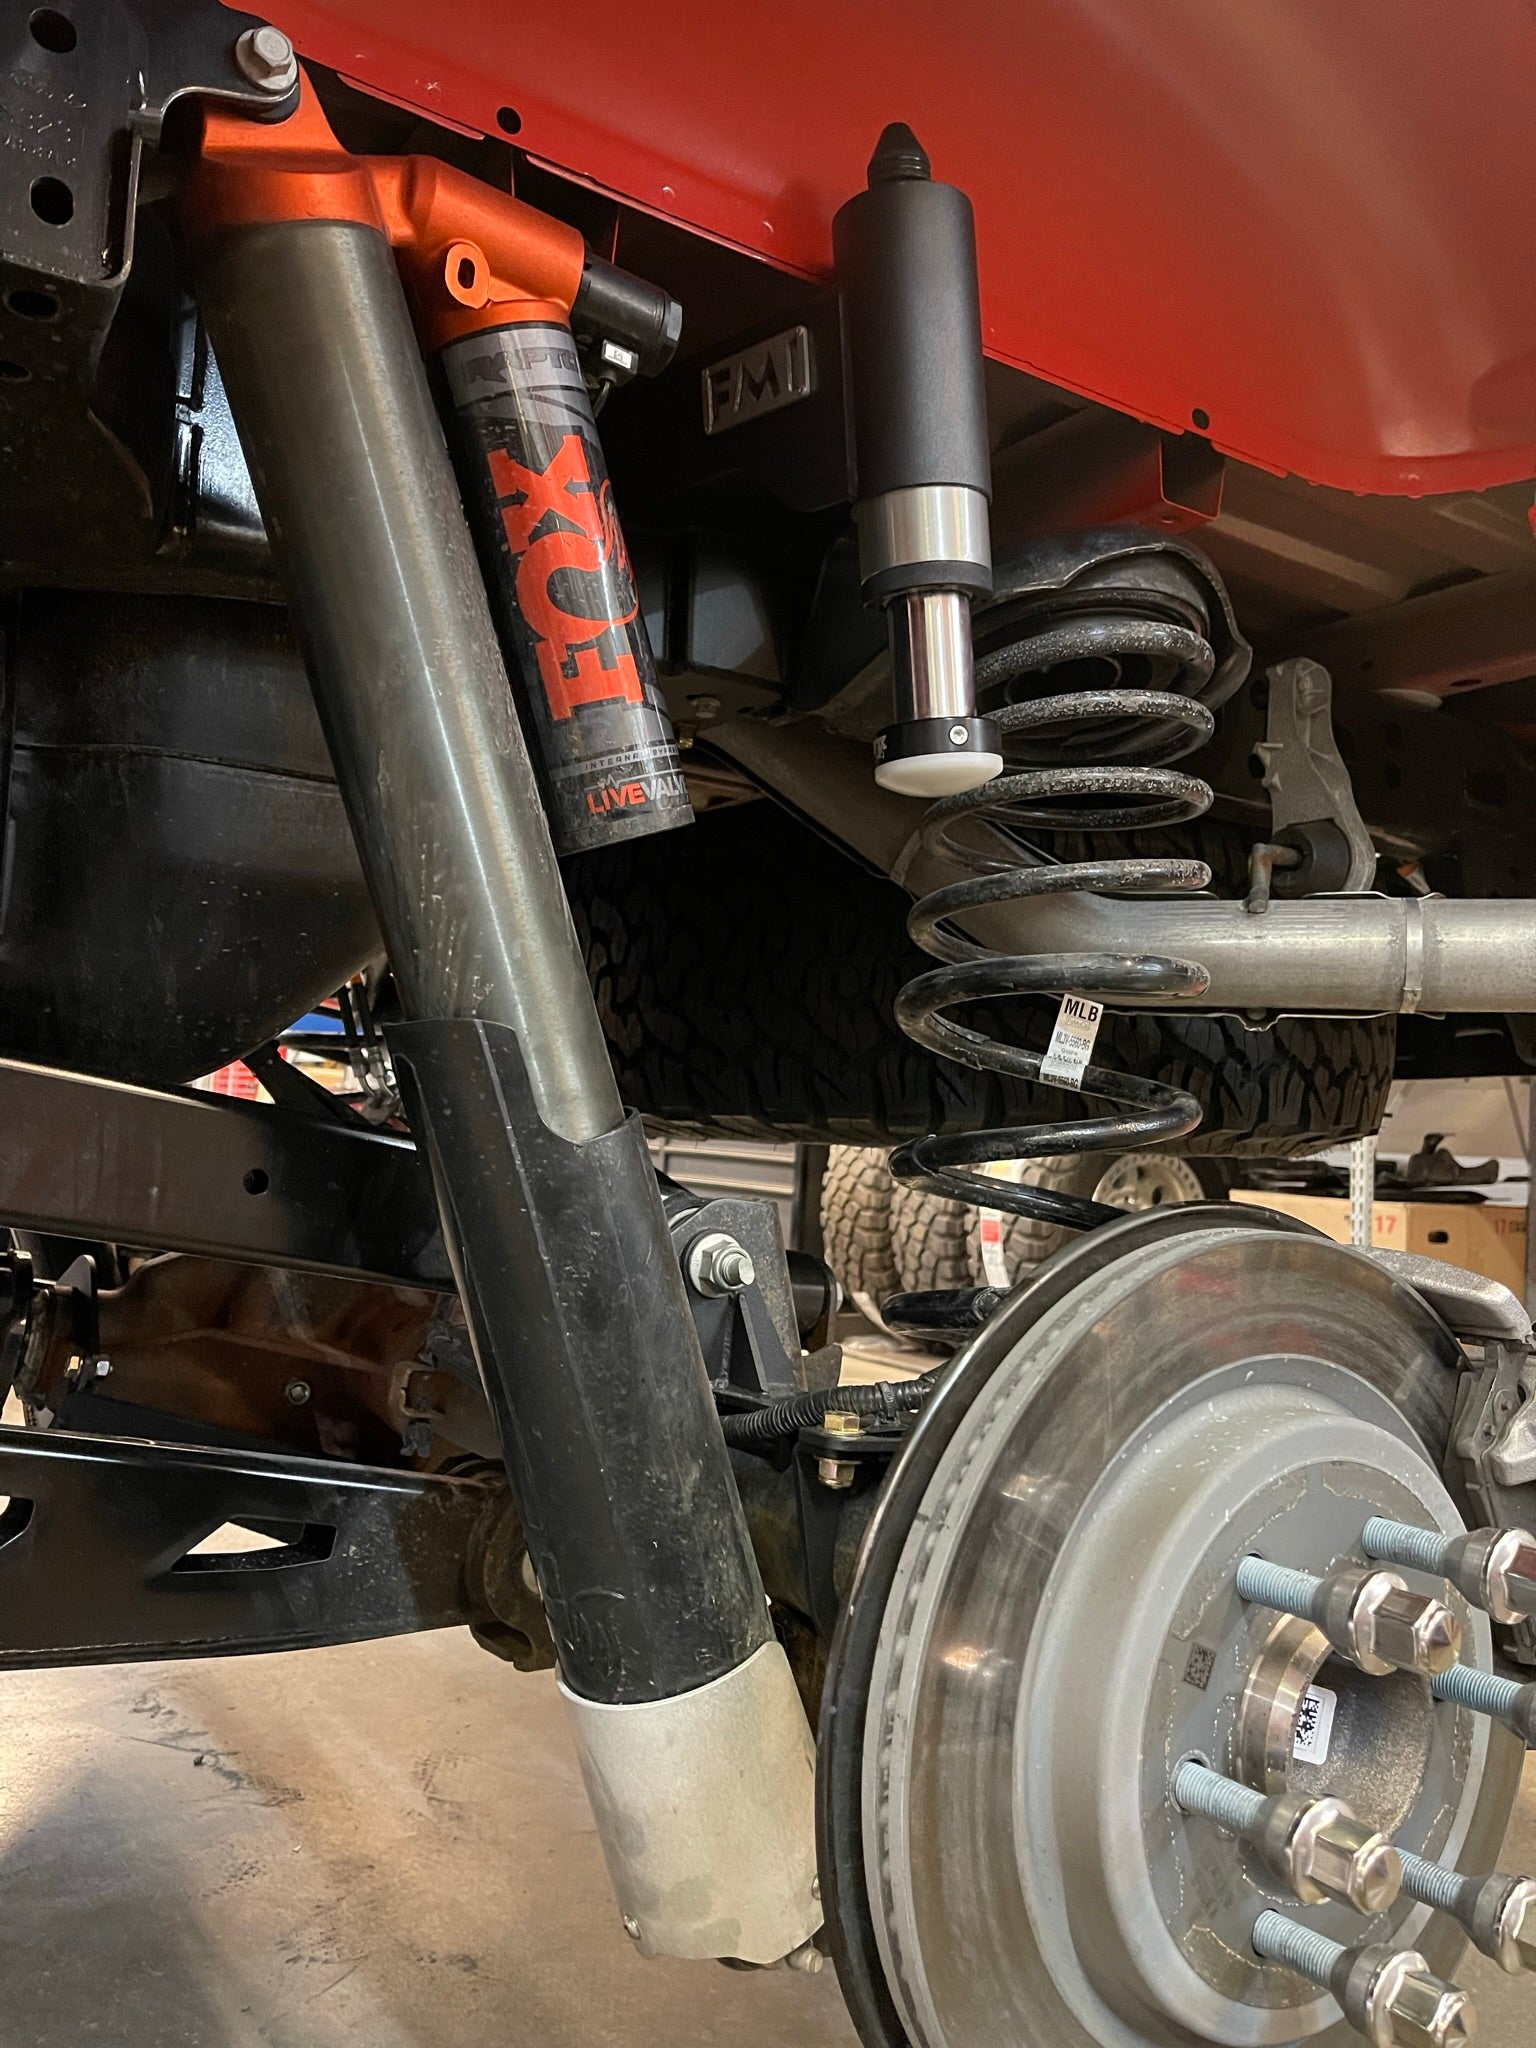 Gen 3 Raptor rear bump stop kit keeps the rear suspension in great shape by taking the load off of those accidental bigger hits.  Uses a 2.5" travel 2.5" diameter bump stop 